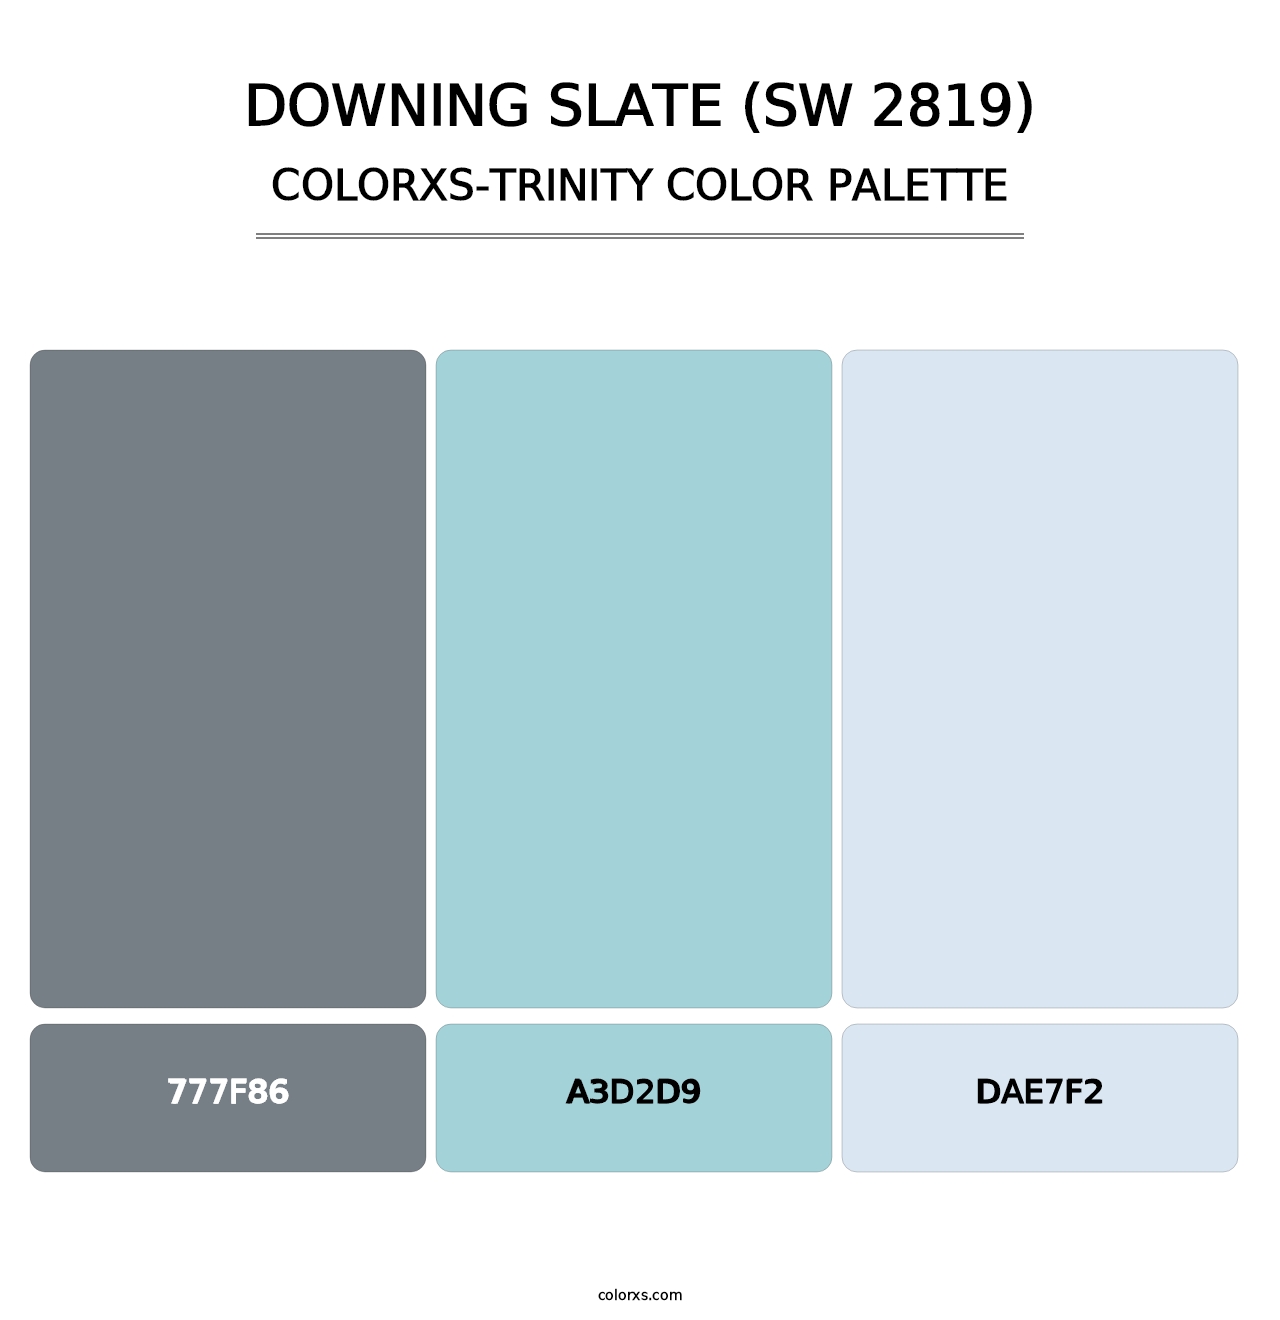 Downing Slate (SW 2819) - Colorxs Trinity Palette